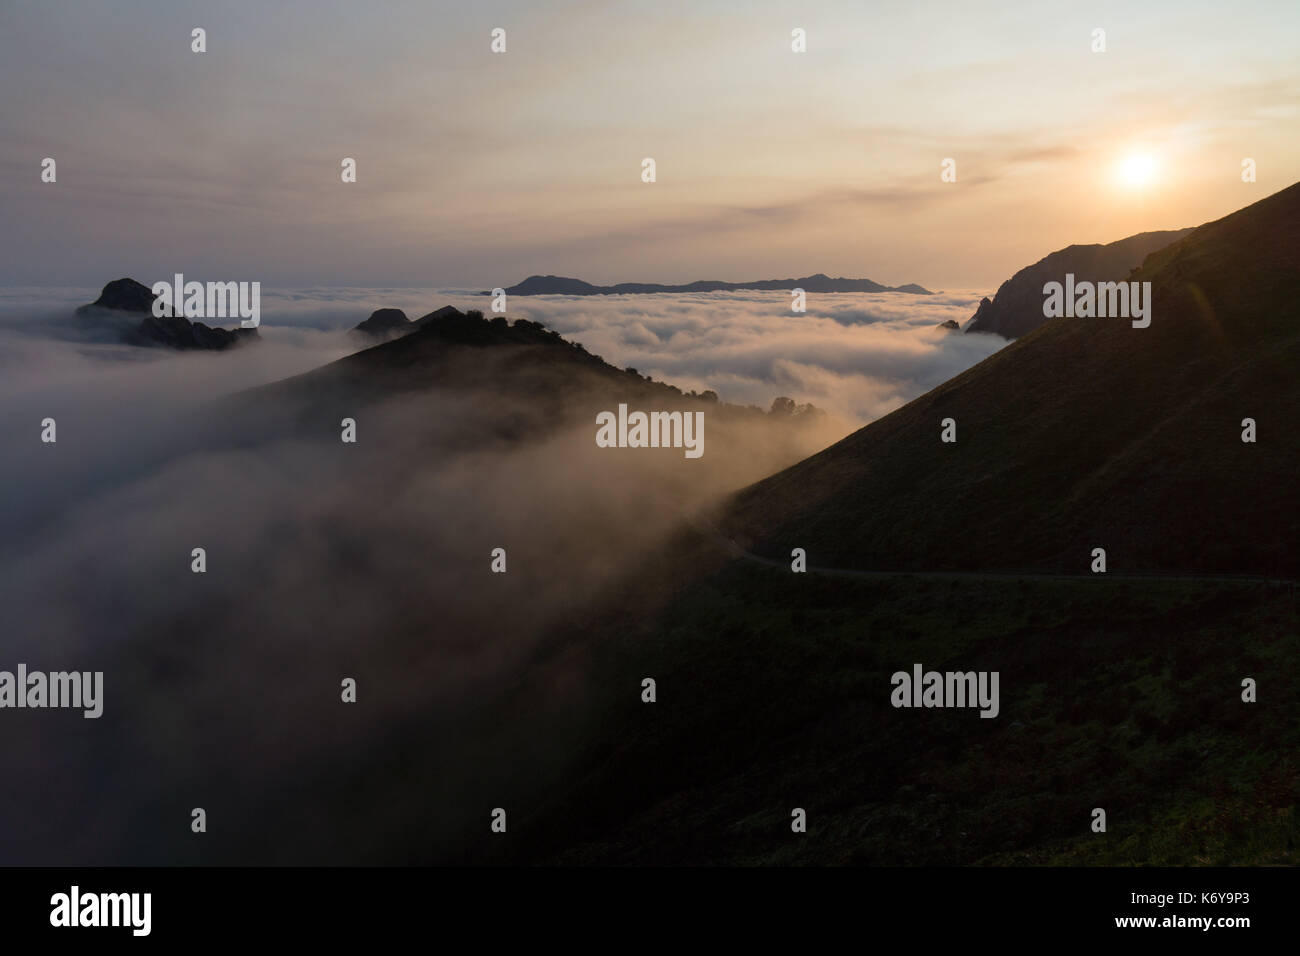 Early morning sunrise over a cloud inversion in the Cabrales valley, Asturias, Spain. Stock Photo